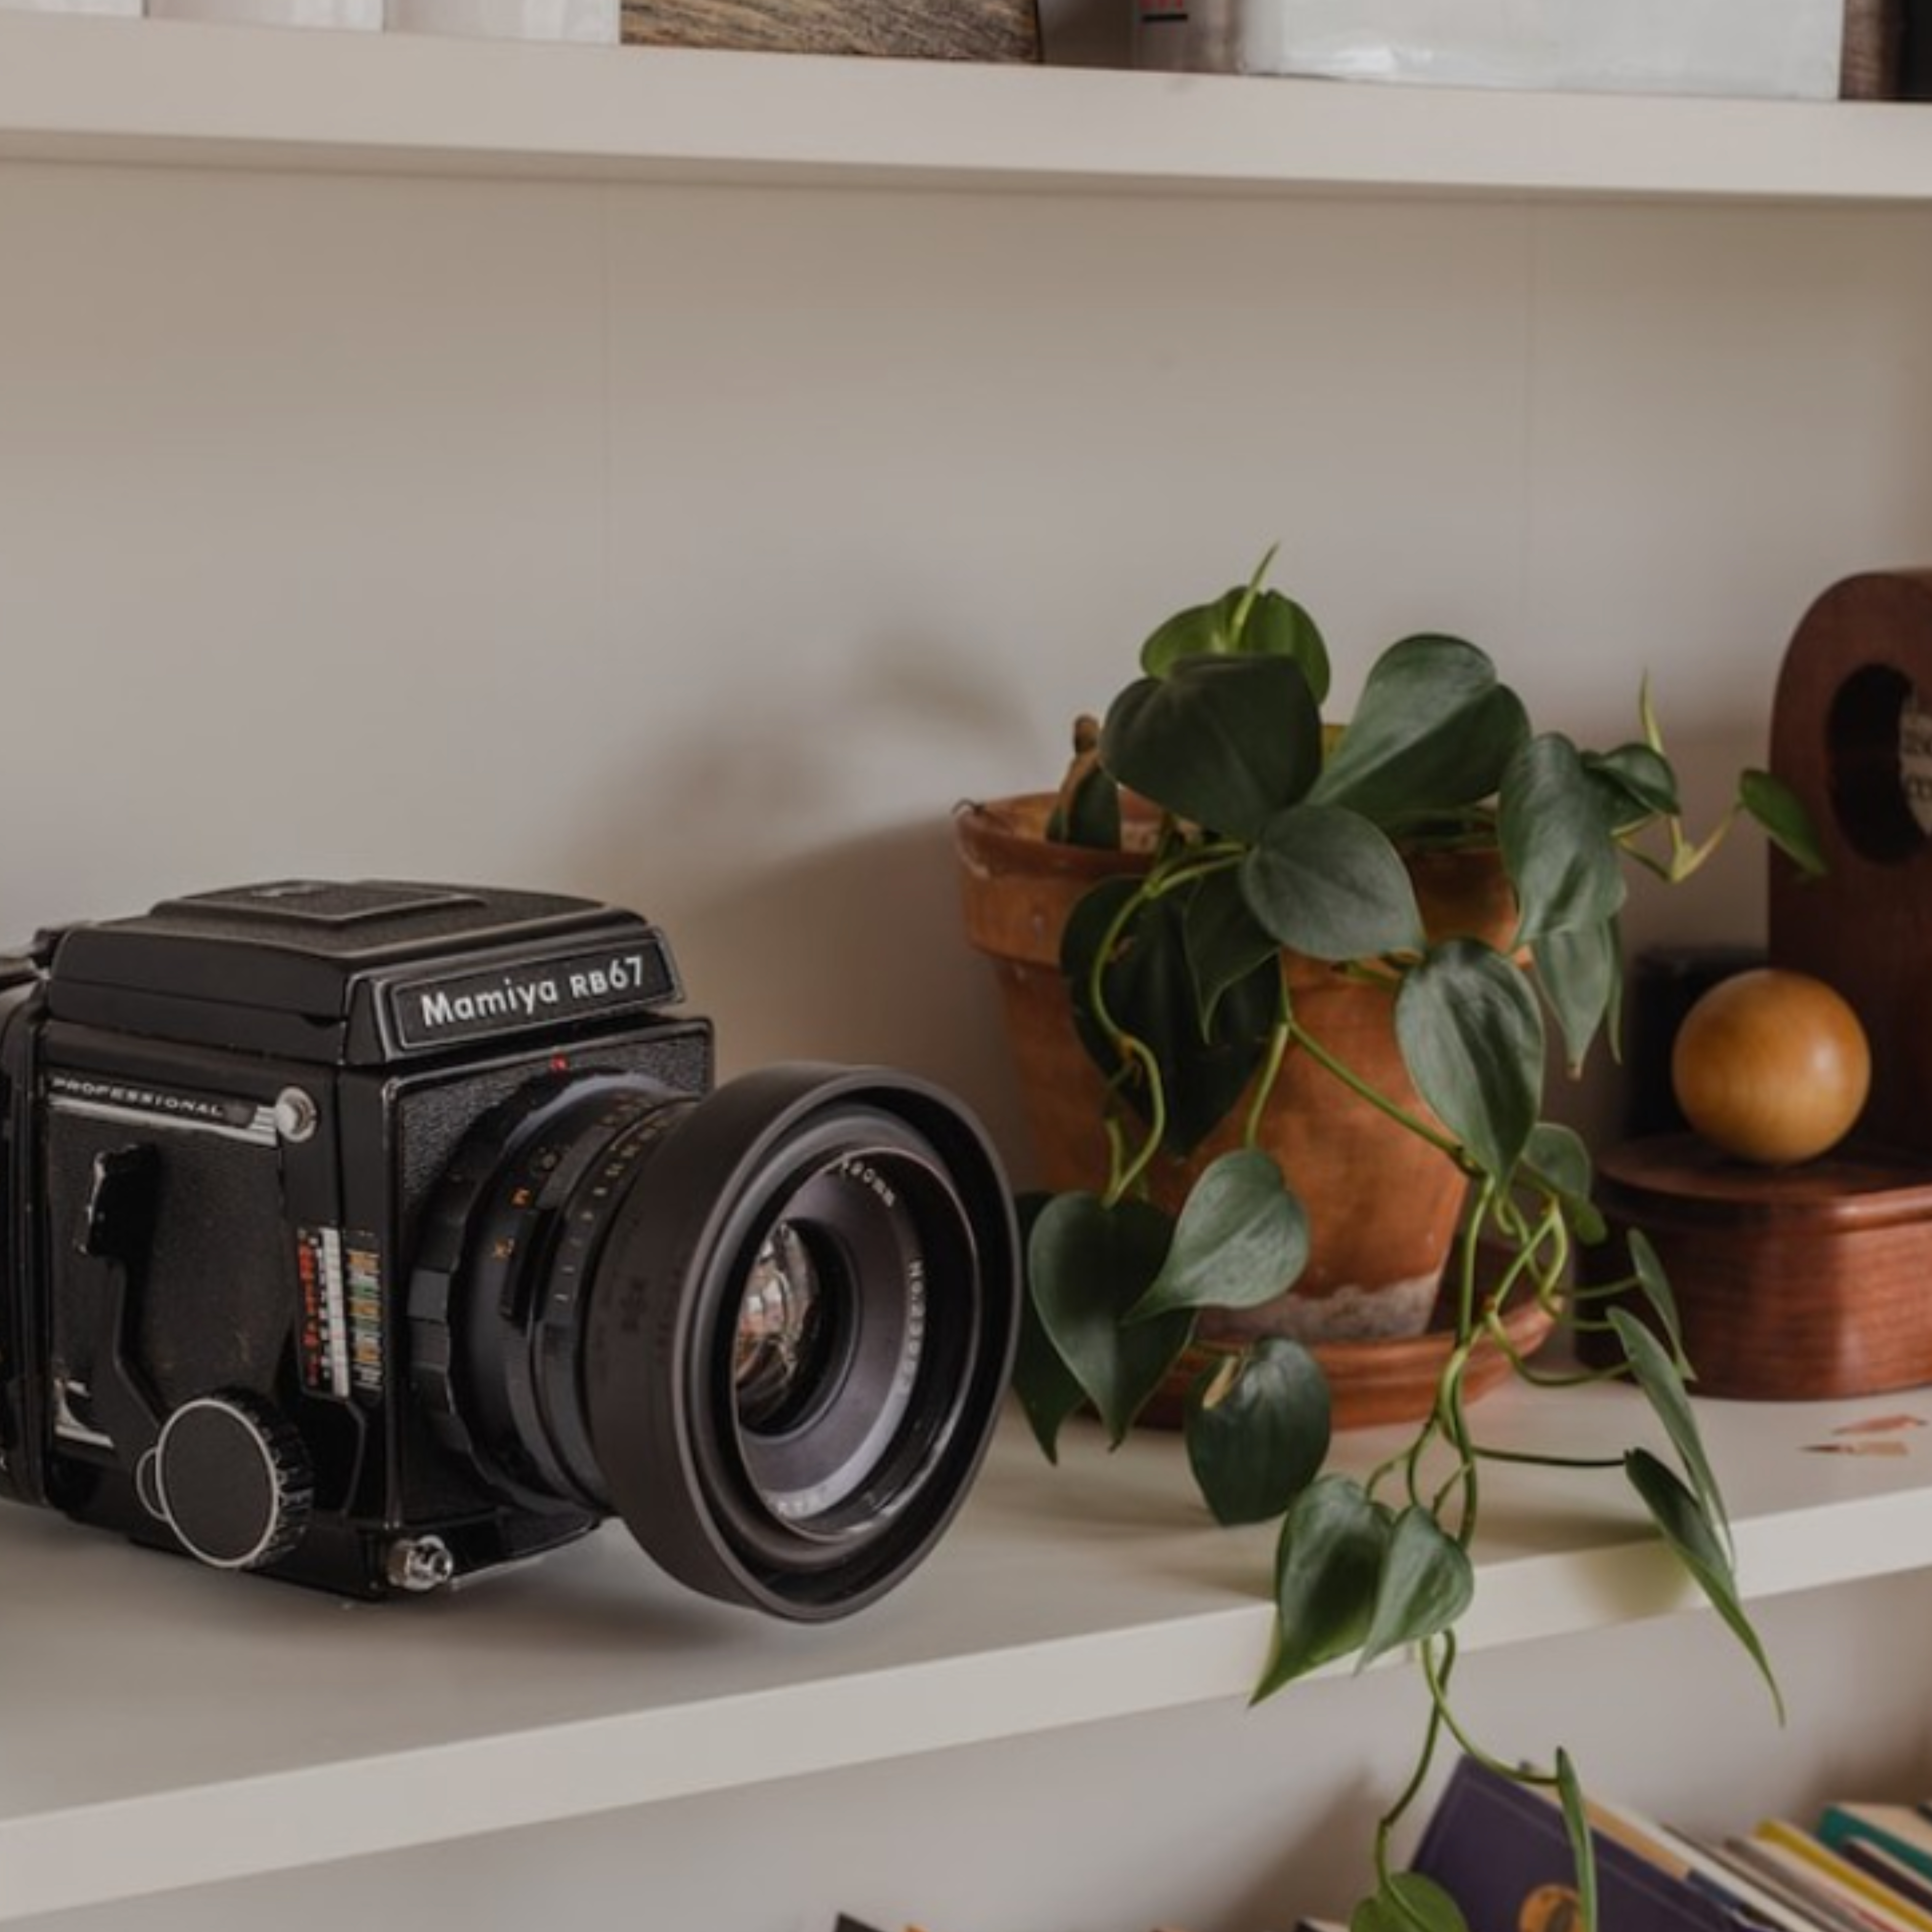 An old vintage camera sitting on a white shelf next to a potted plant